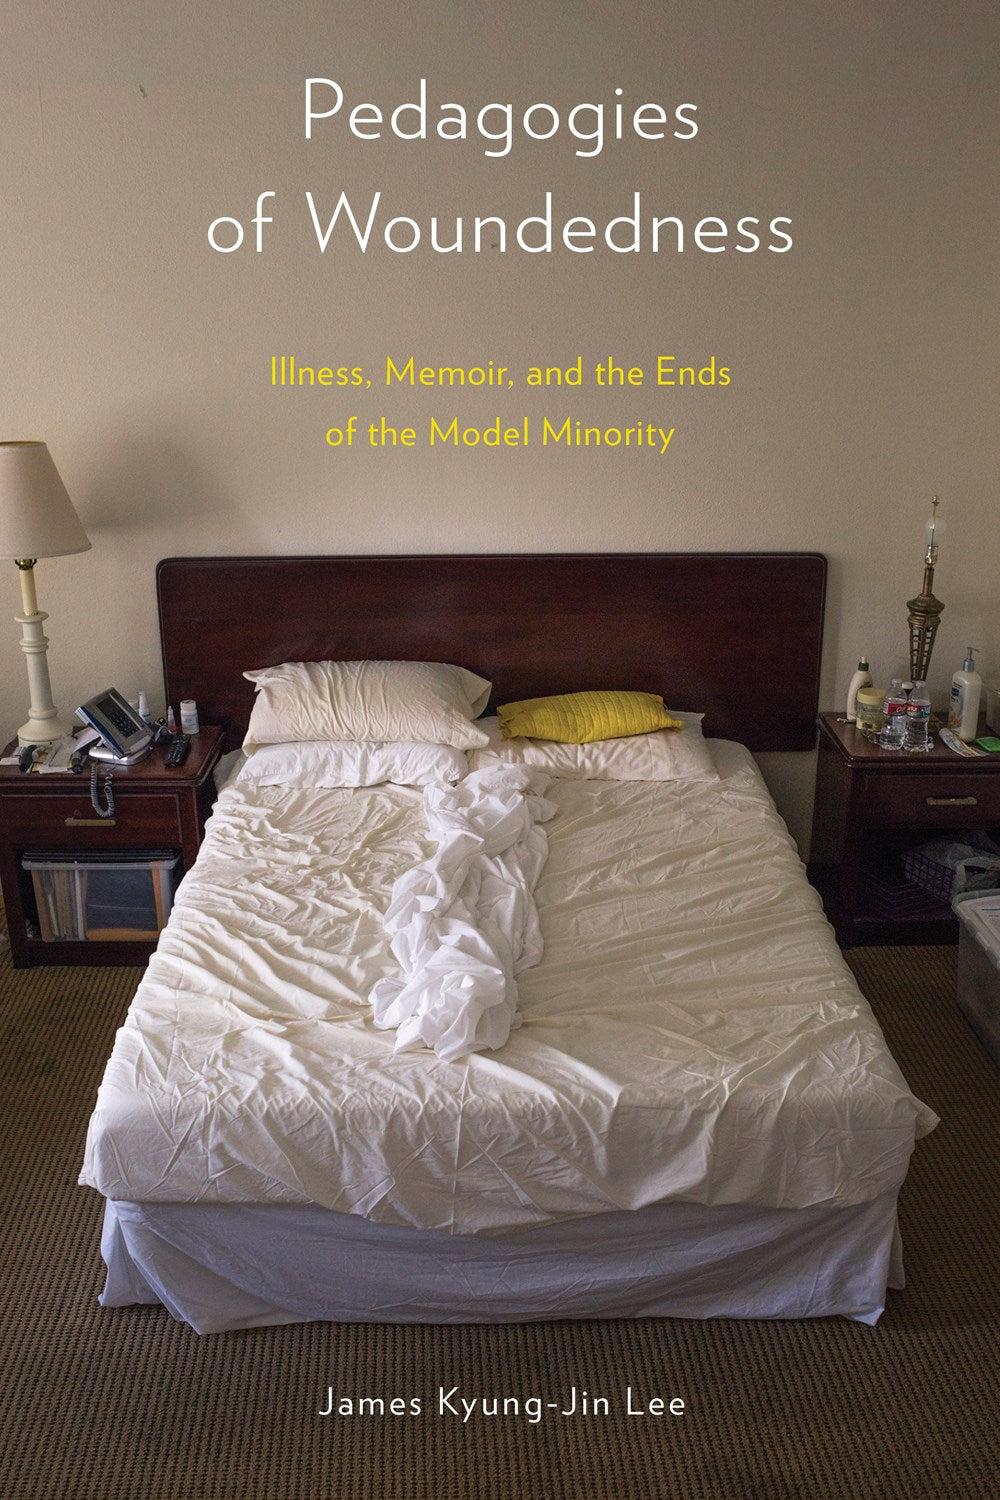 Pedagogies of Woundedness: Illness, Memoir, and the Ends of the Model Minority